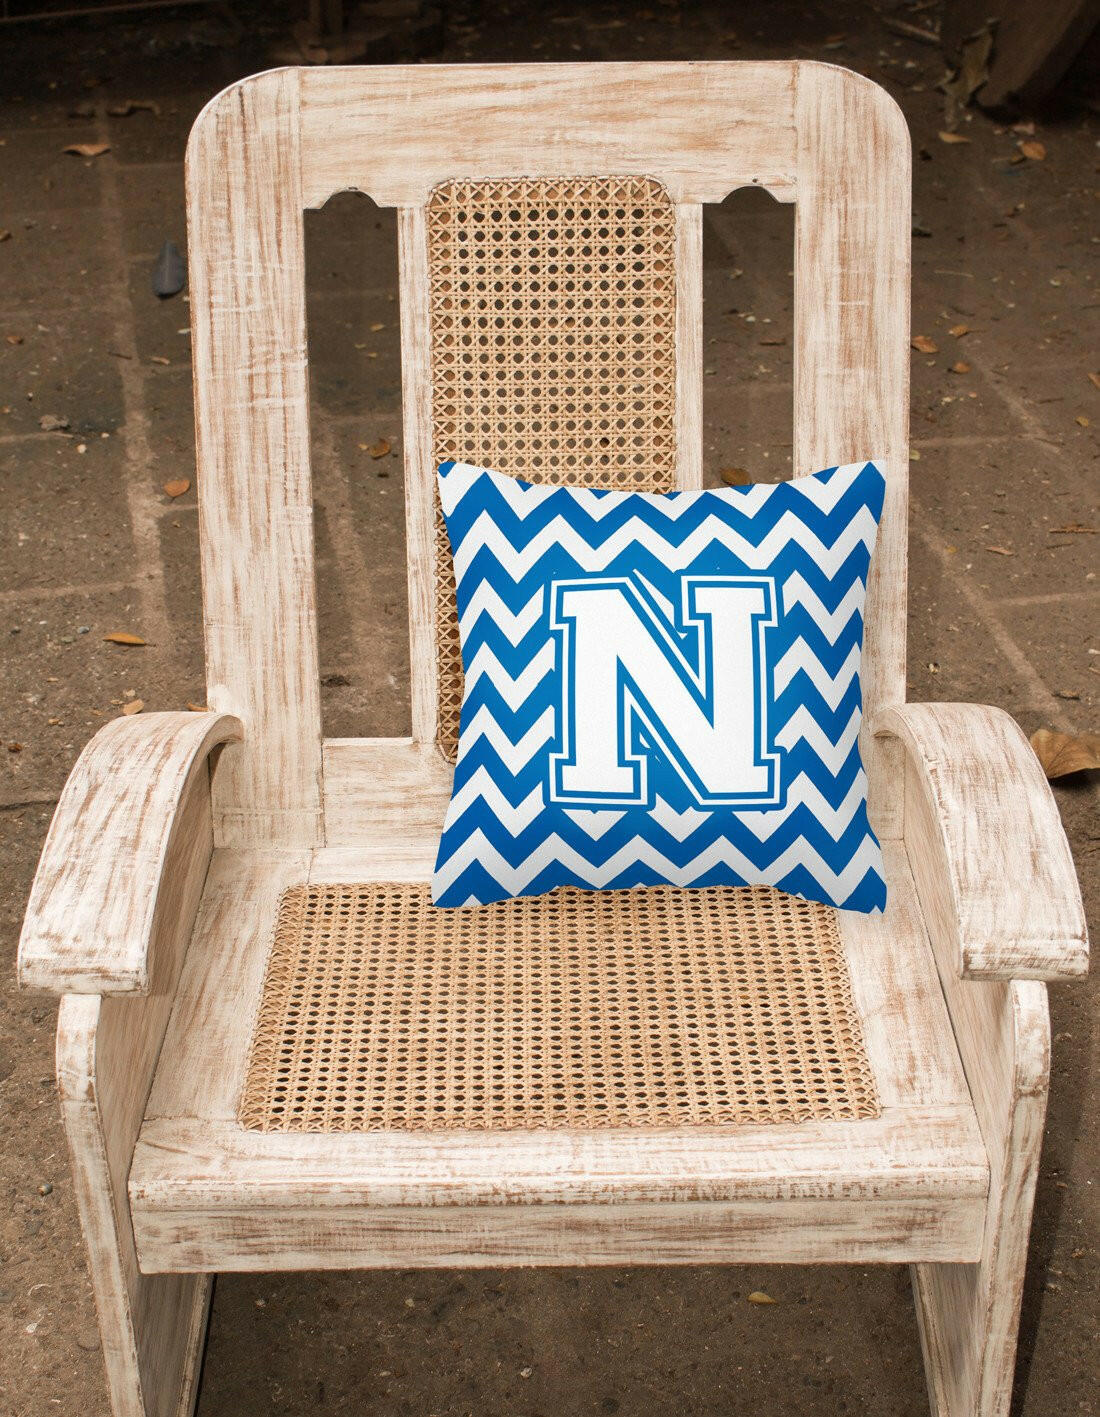 Letter N Chevron Blue and White Fabric Decorative Pillow CJ1045-NPW1414 by Caroline's Treasures